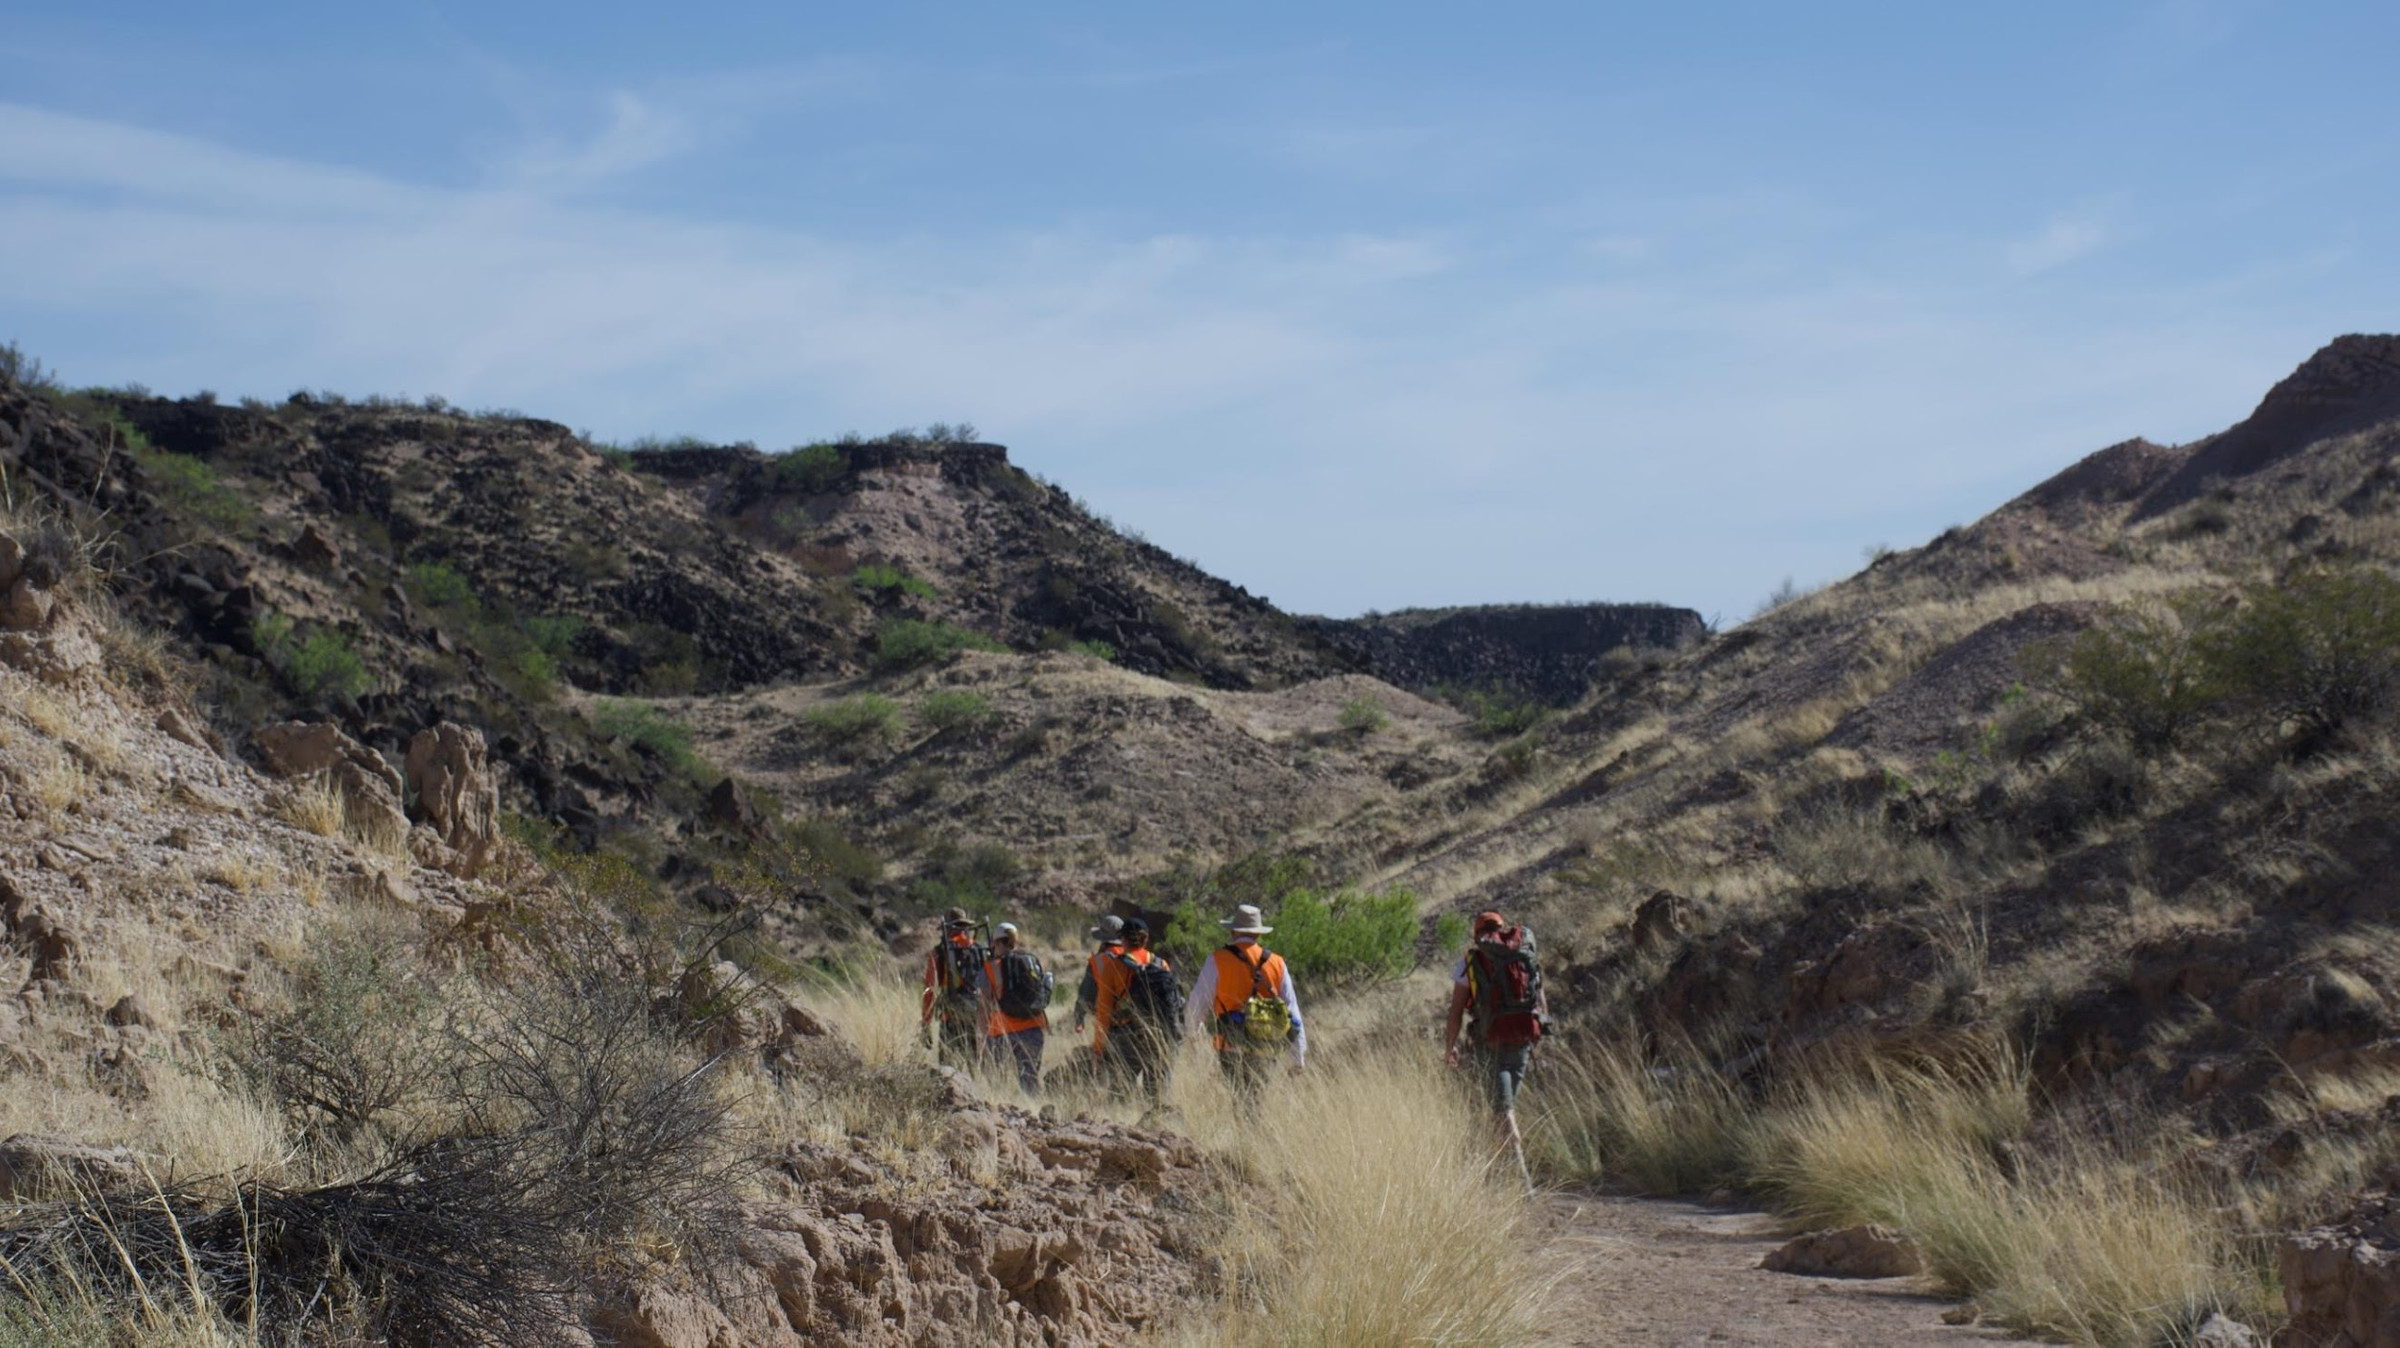 The GEODES team embarks on the two-mile hike out of Kilbourne Hole.